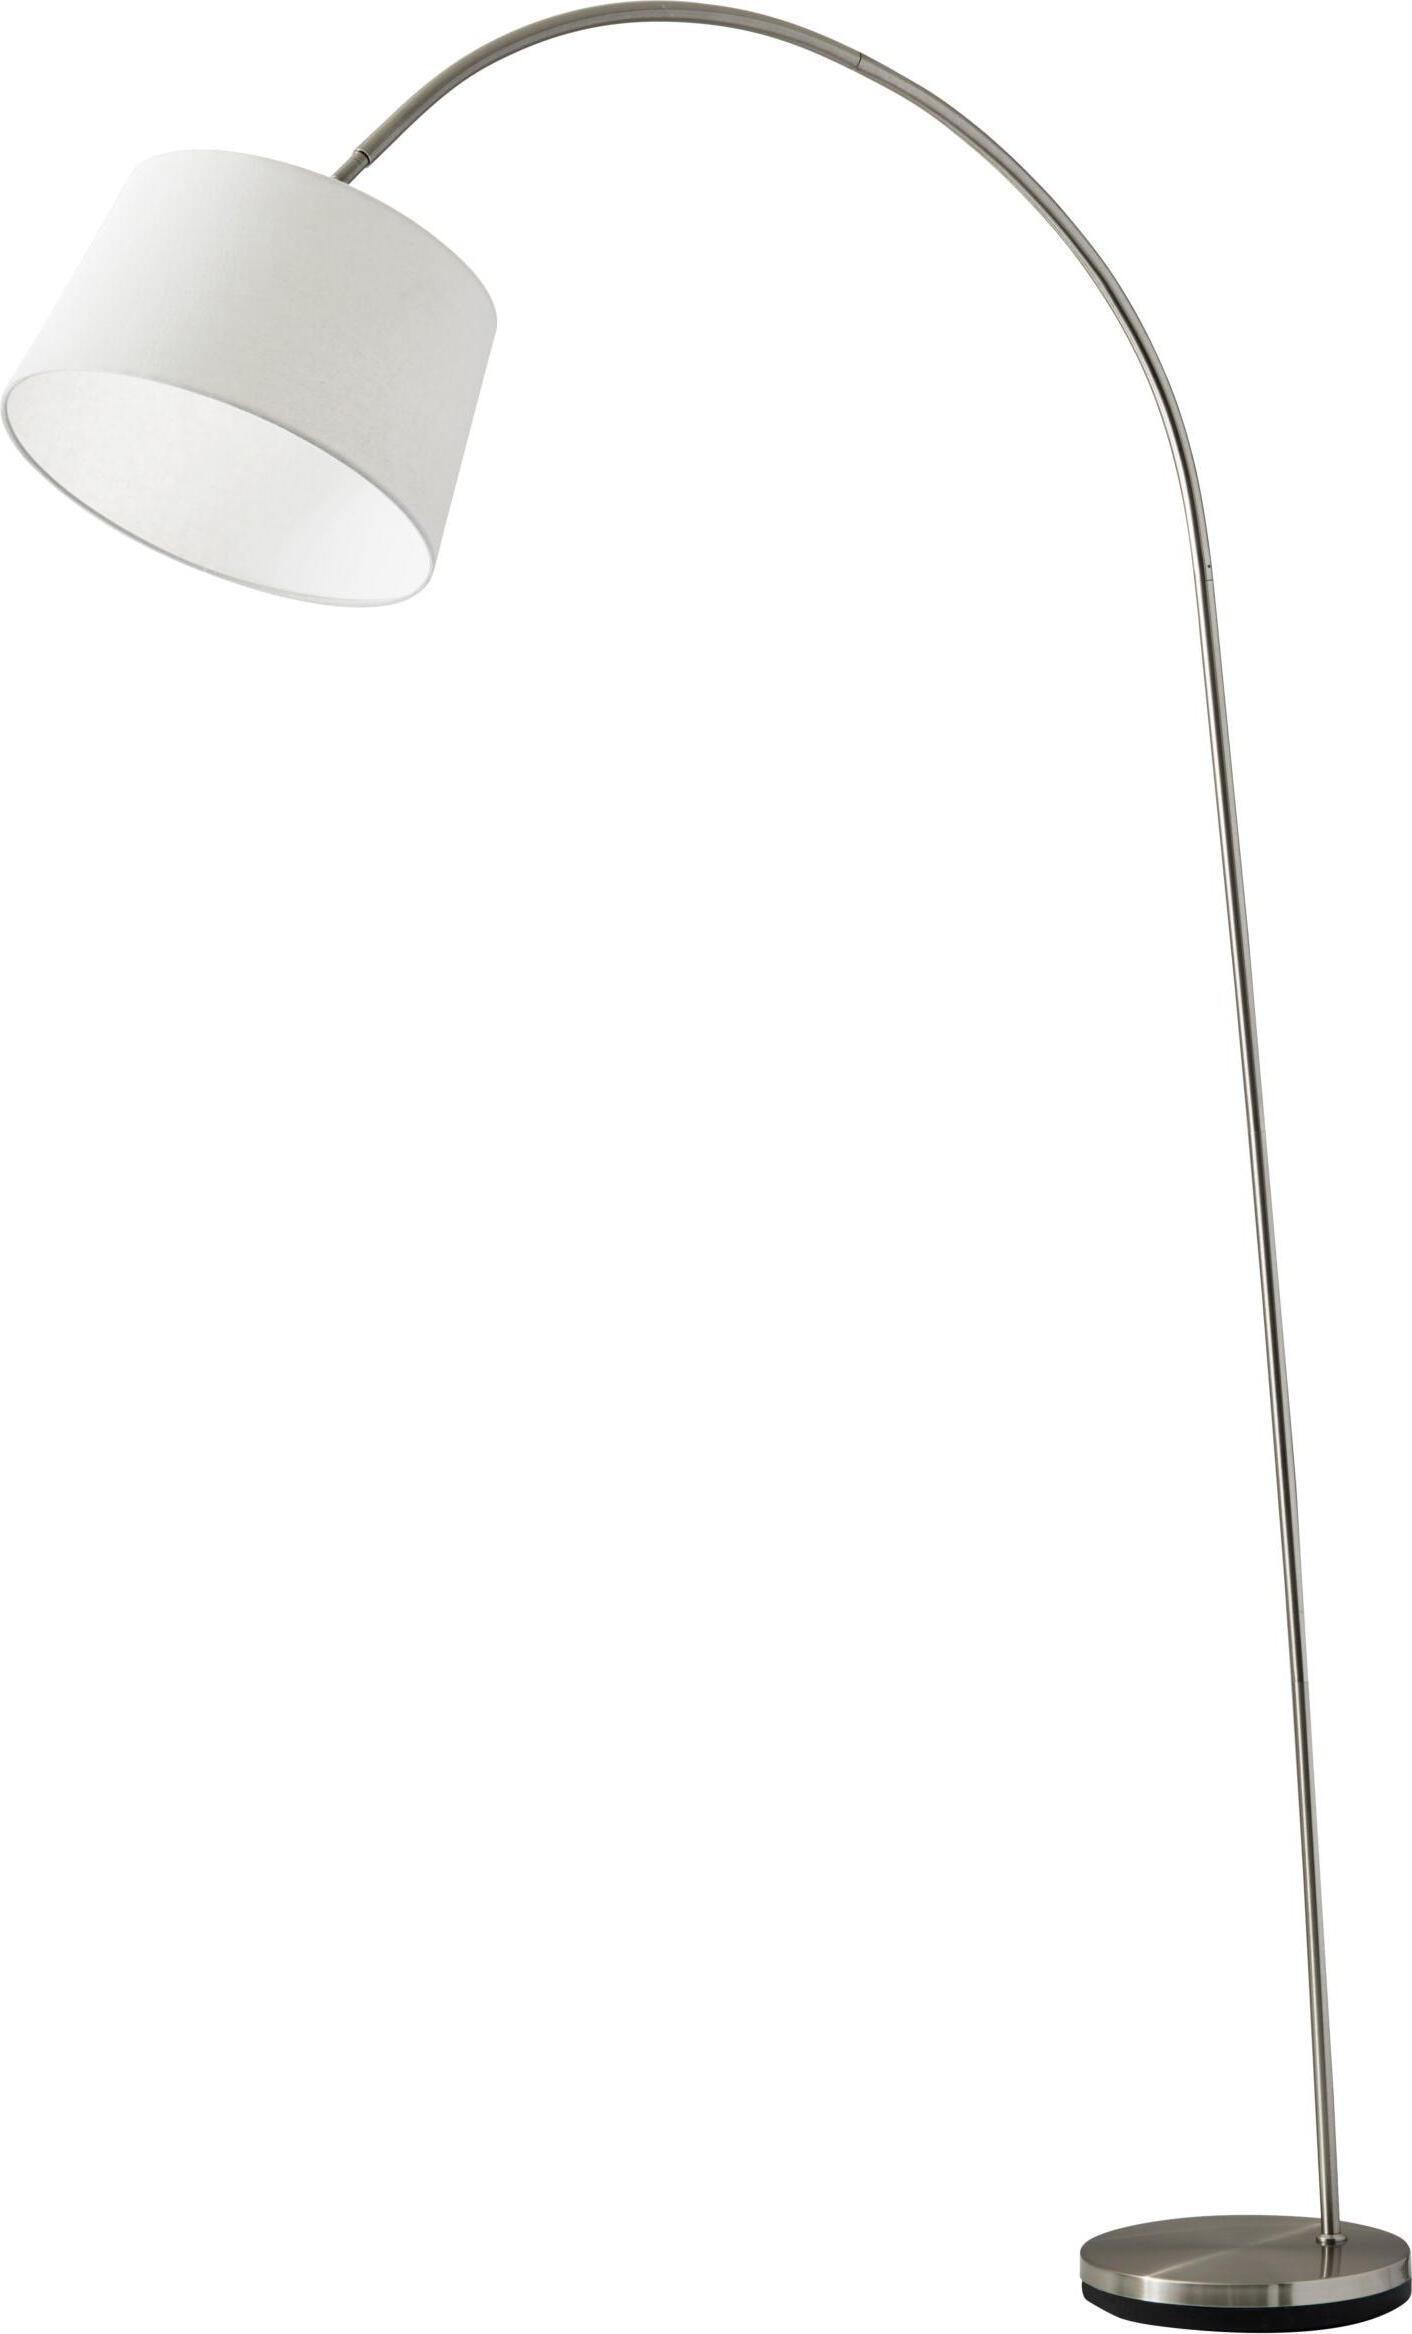 Adesso Floor Lamps - Goliath Arc Lamp Brushed Steel